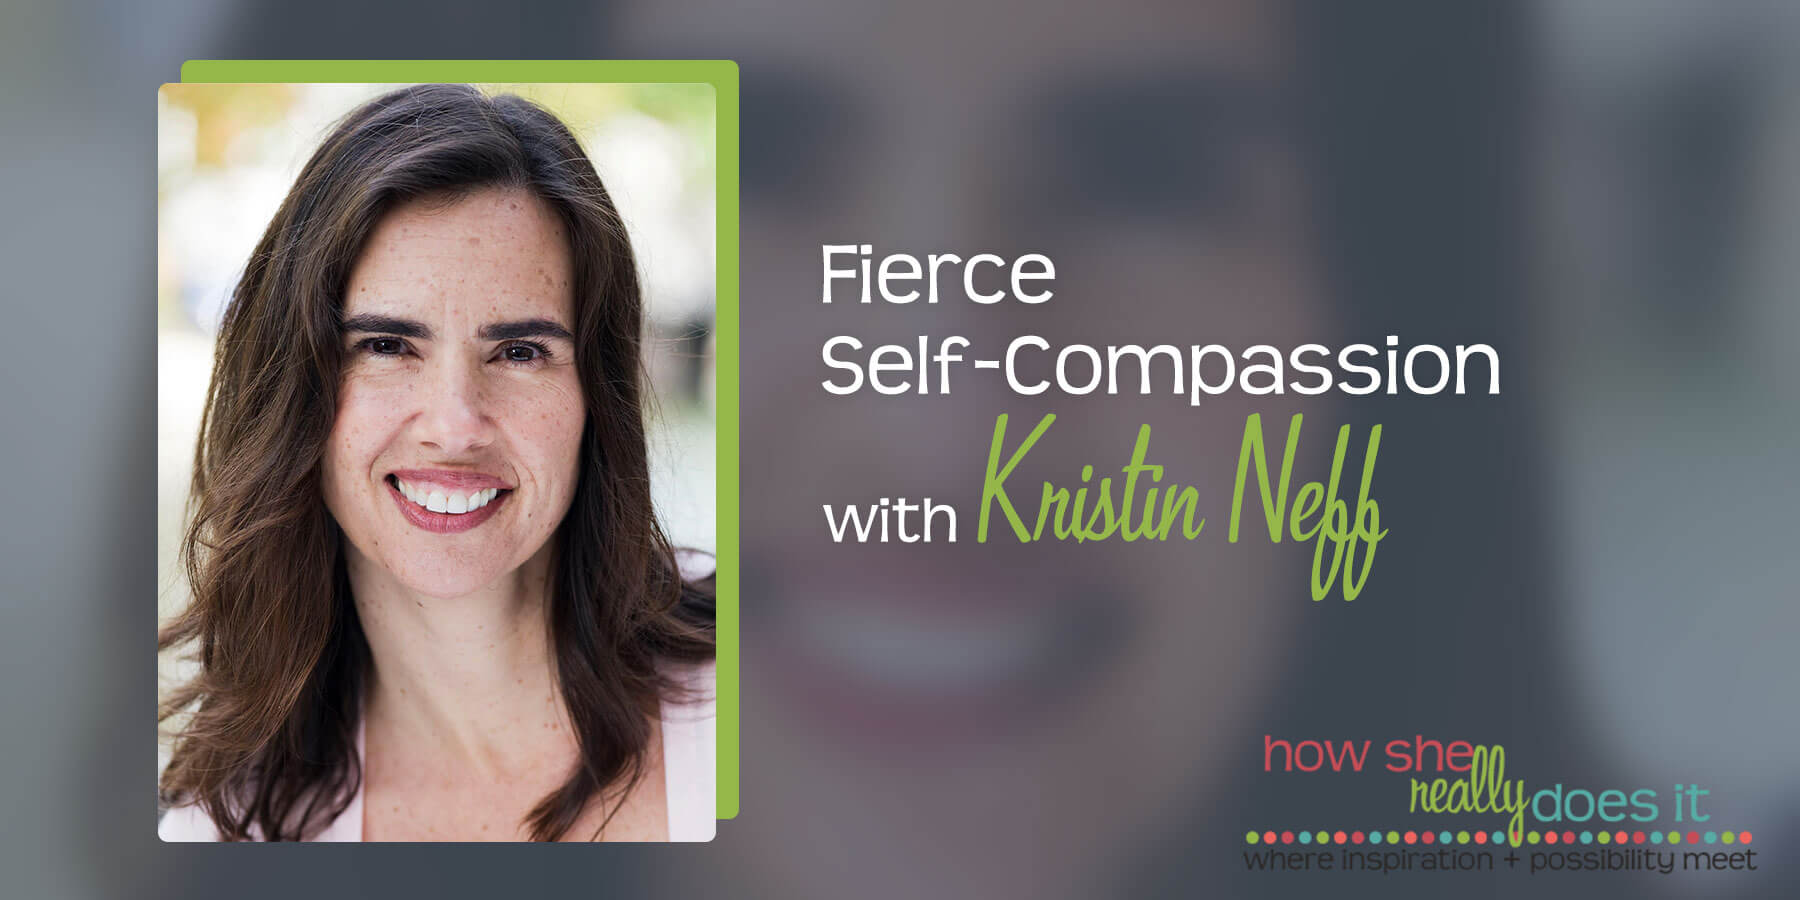 How She Really Does It with Koren Motekaitis | Fierce Self-Compassion with Kristin Neff